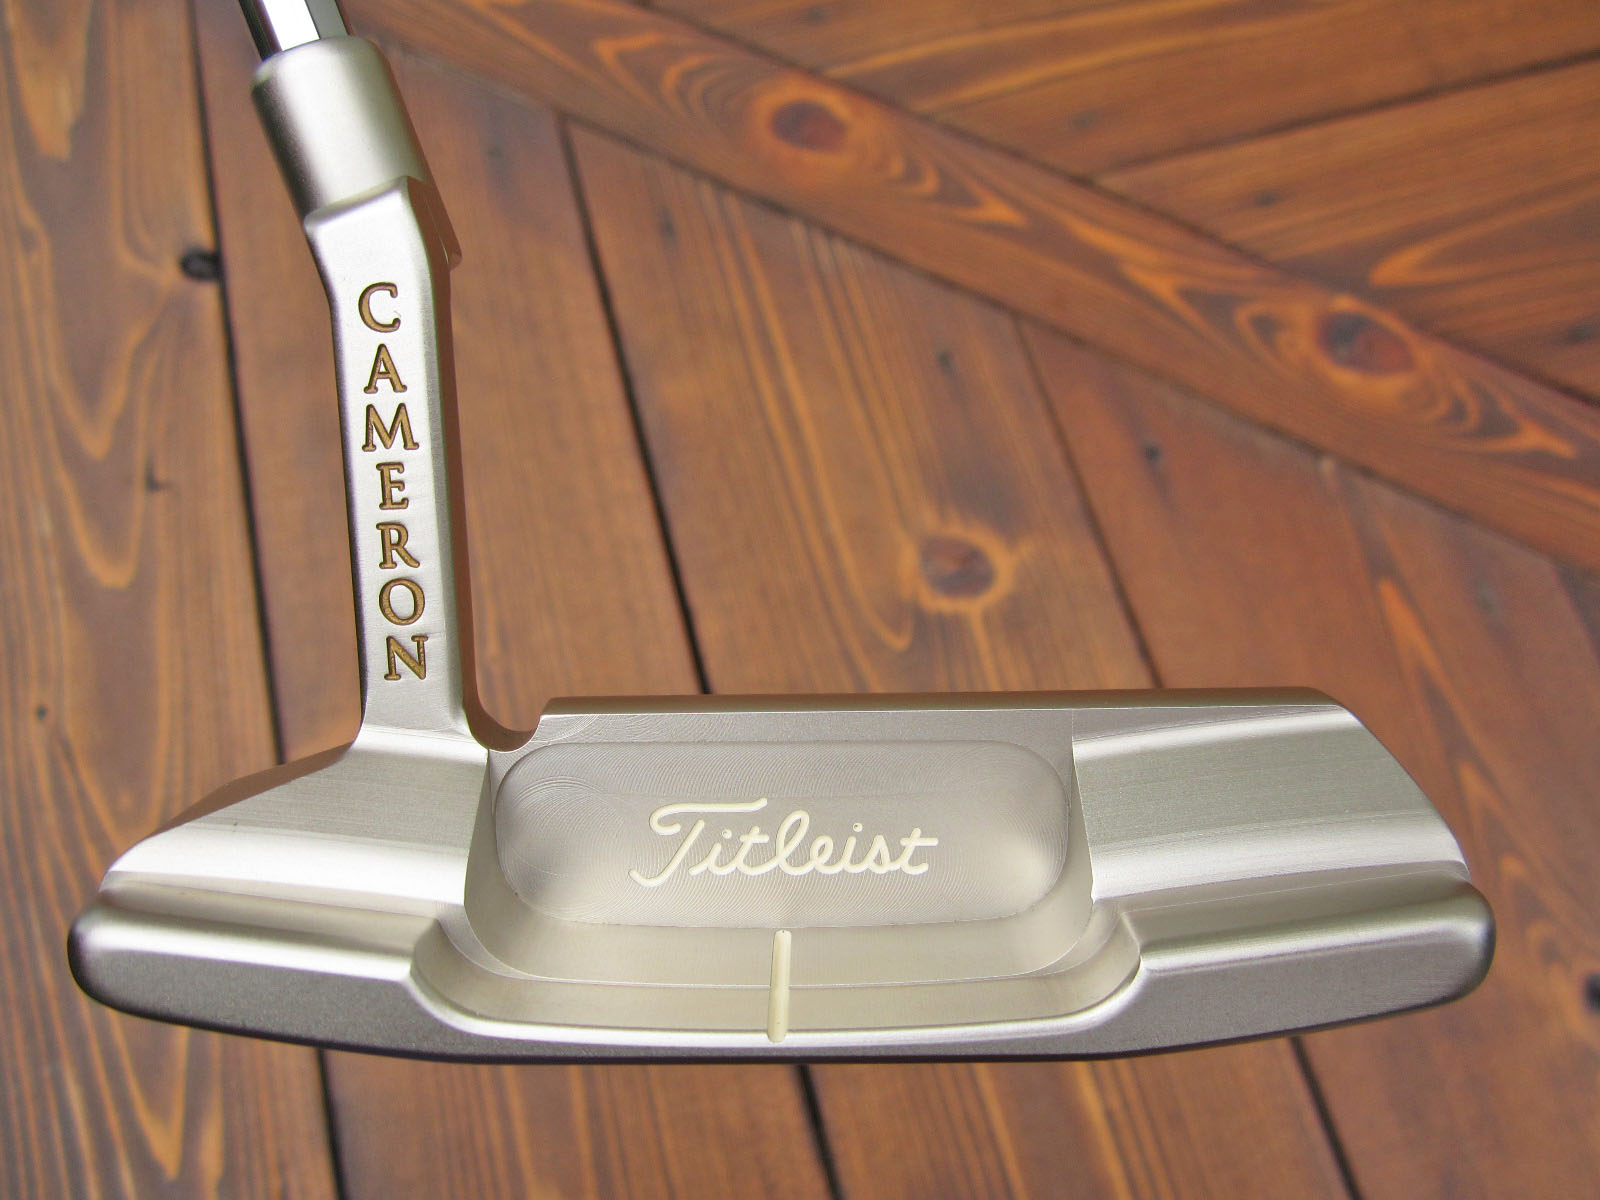 Scotty Cameron Inspired by Mark O'Meara Pro Platinum Newport 2